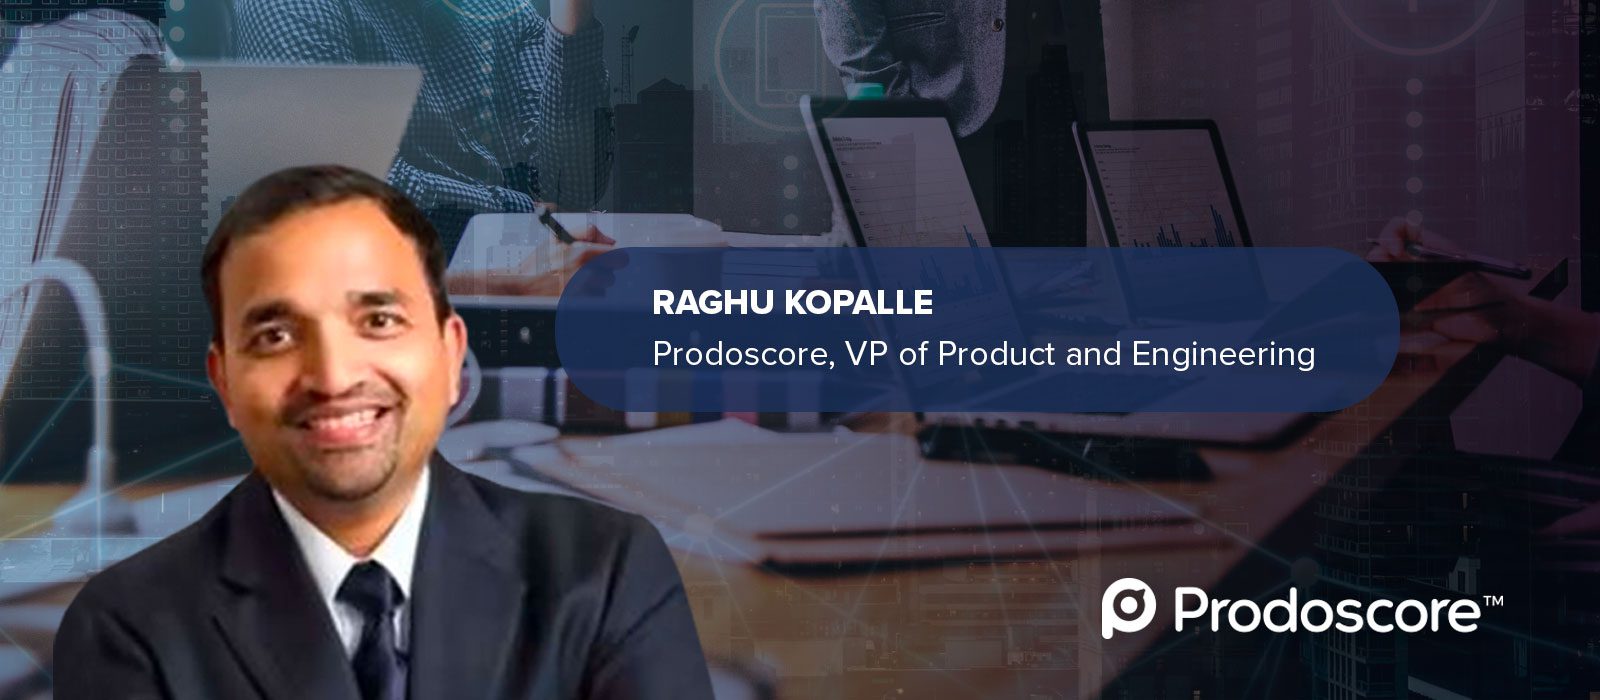 Prodoscore Announces Veteran Technologist Raghu Kopalle as VP of Product and Engineering